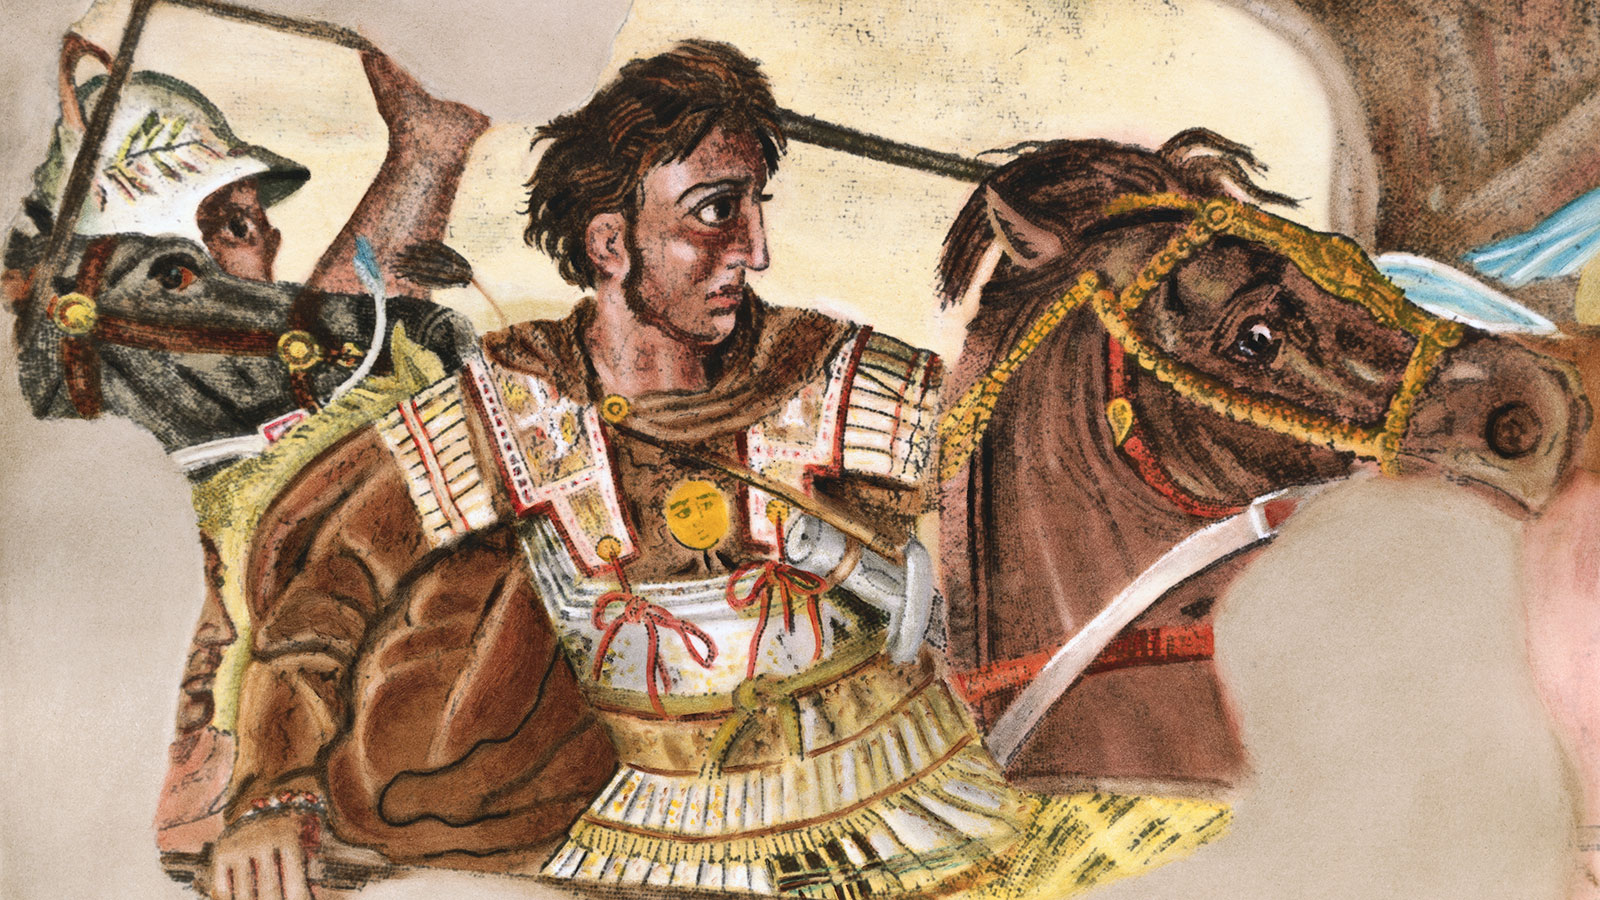 Mural painting of Alexander the great riding a horse during a battle scene.